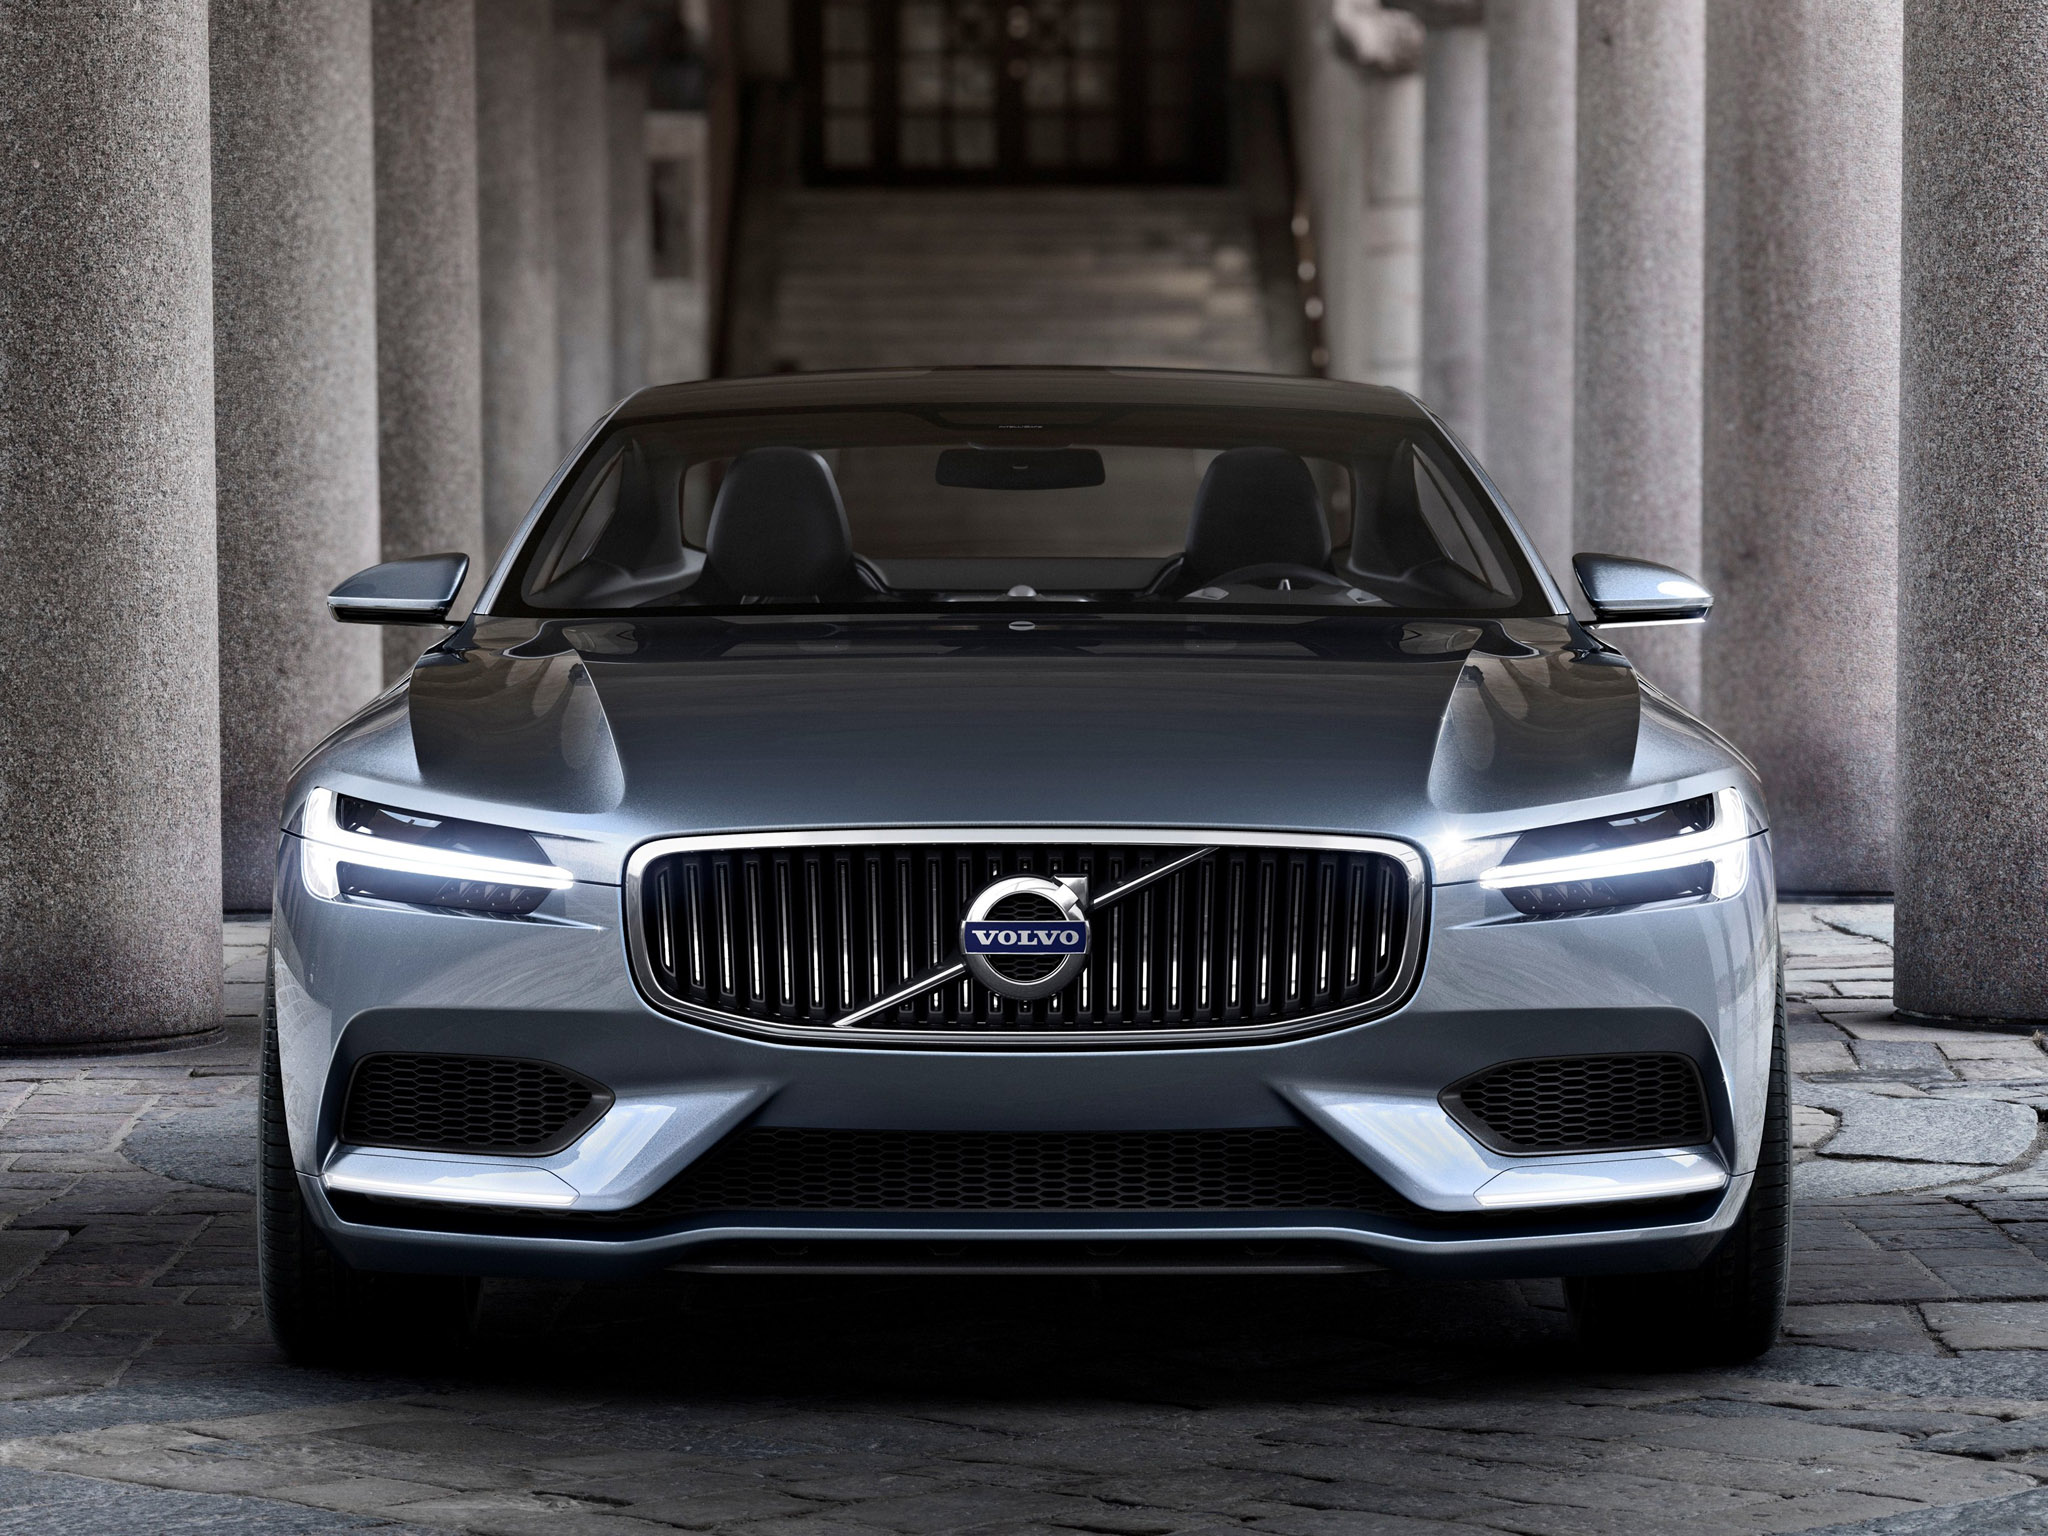 Images of 2013 Volvo Coupe Concept | 2048x1536